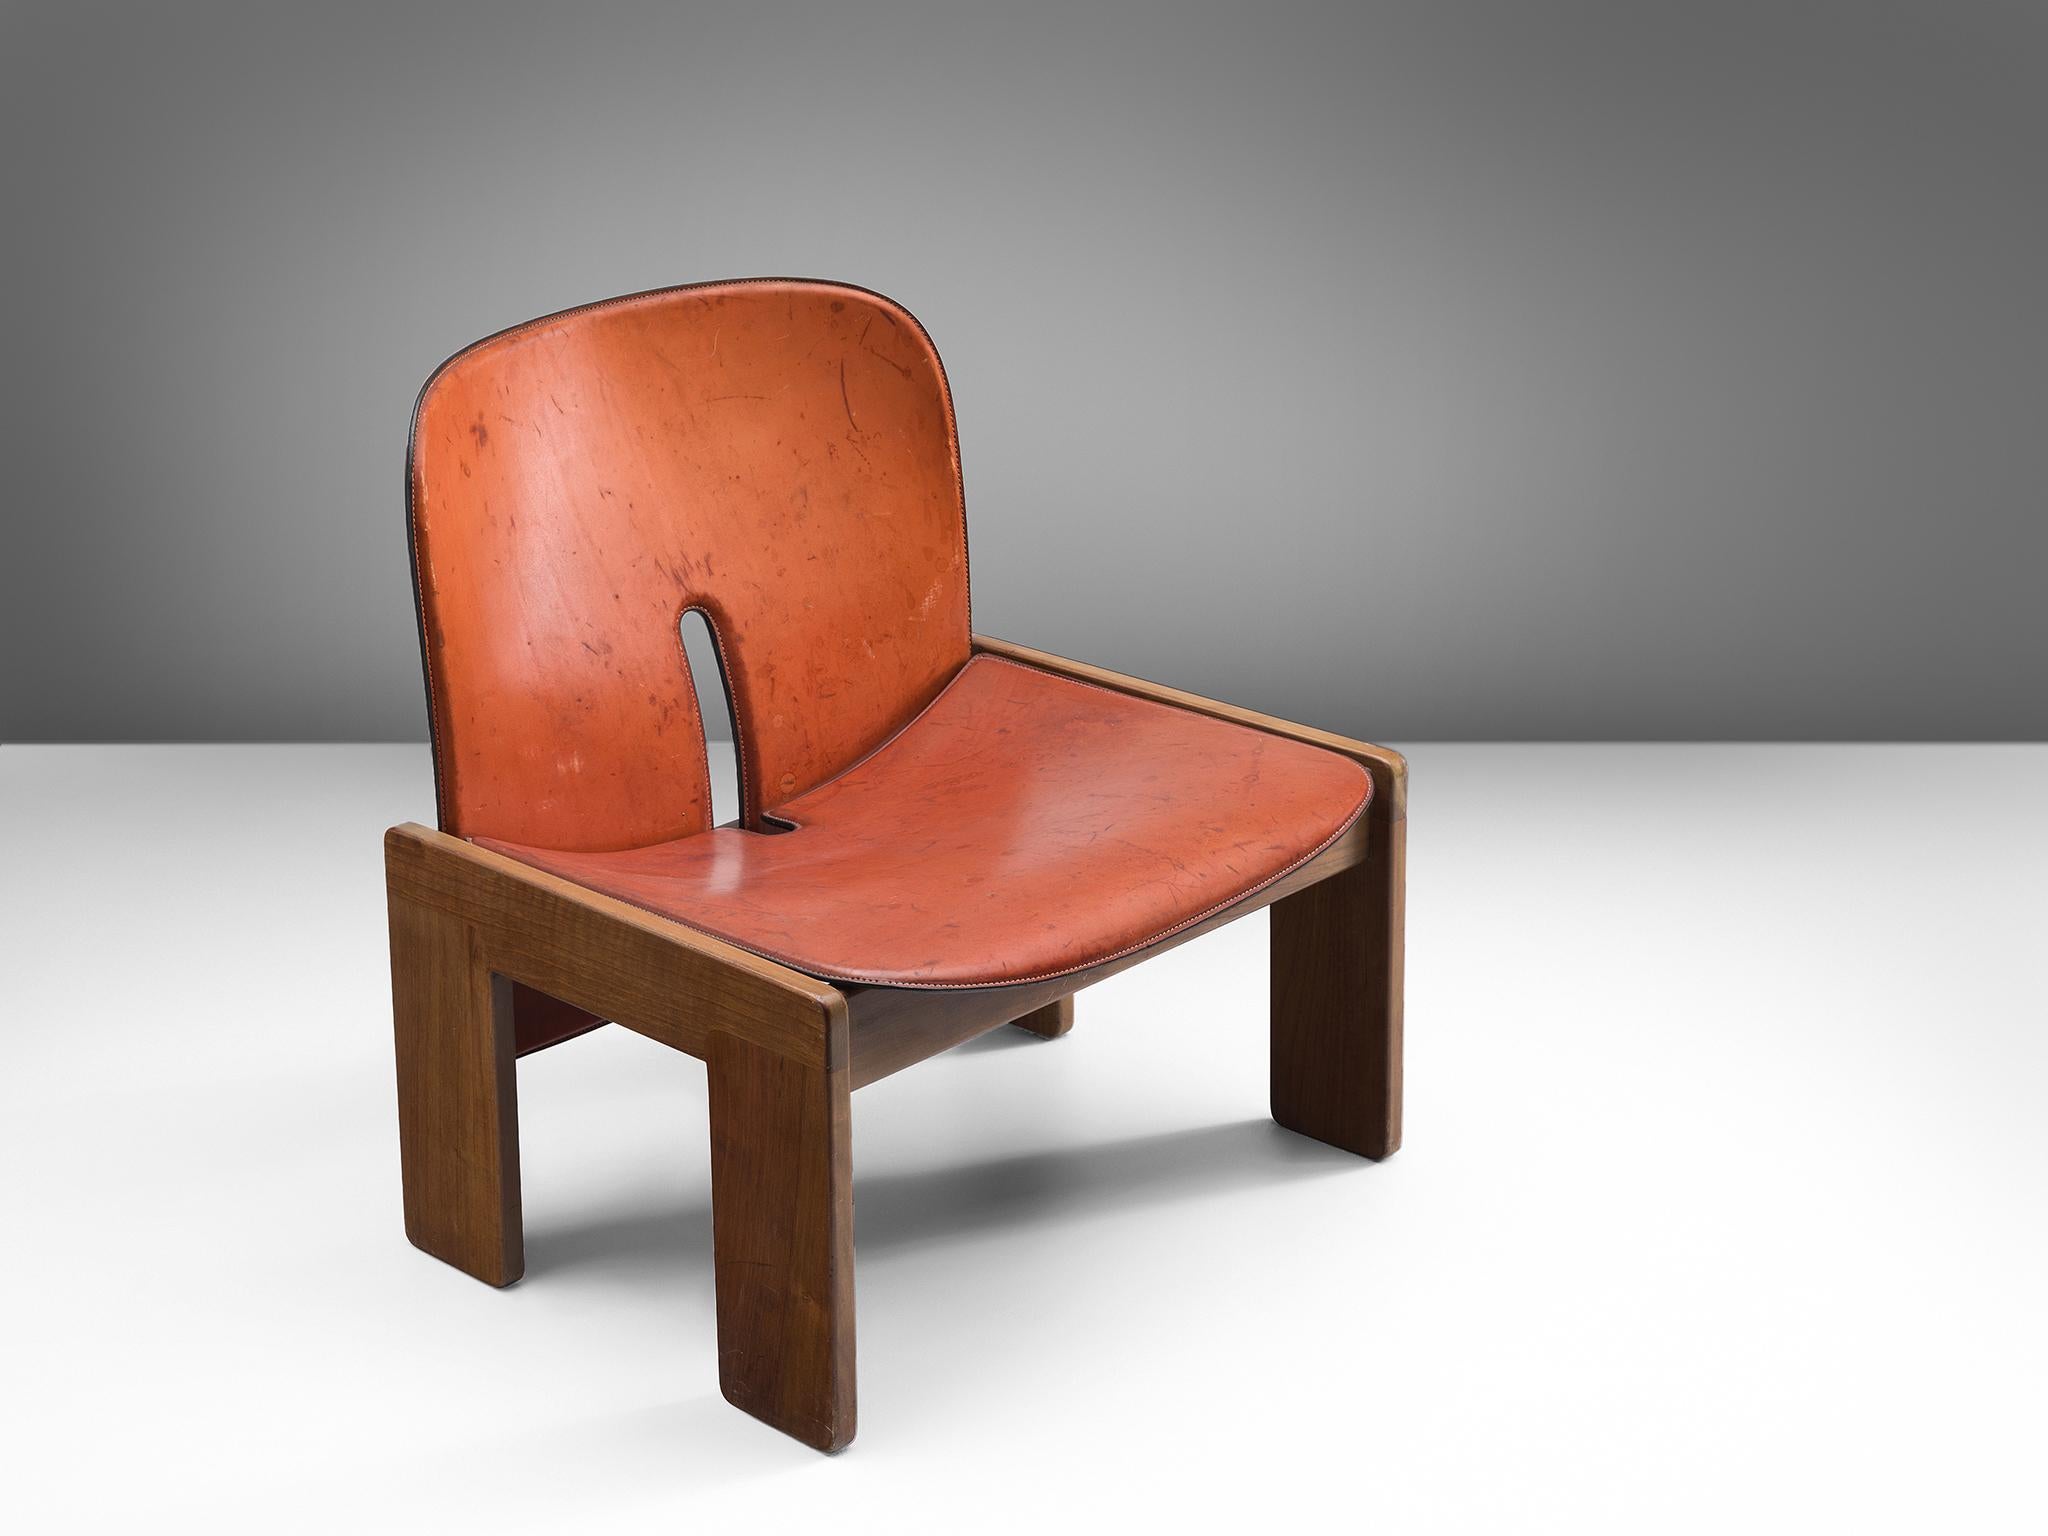 Afra & Tobia Scarpa for Cassina, easy chairs model, walnut and leather, Italy, 1966.

Lounge chair '925' by Italian designer couple Tobia and Afra Scarpa. This low chair has a cubic and architectural appearance. The base consist of four straight,